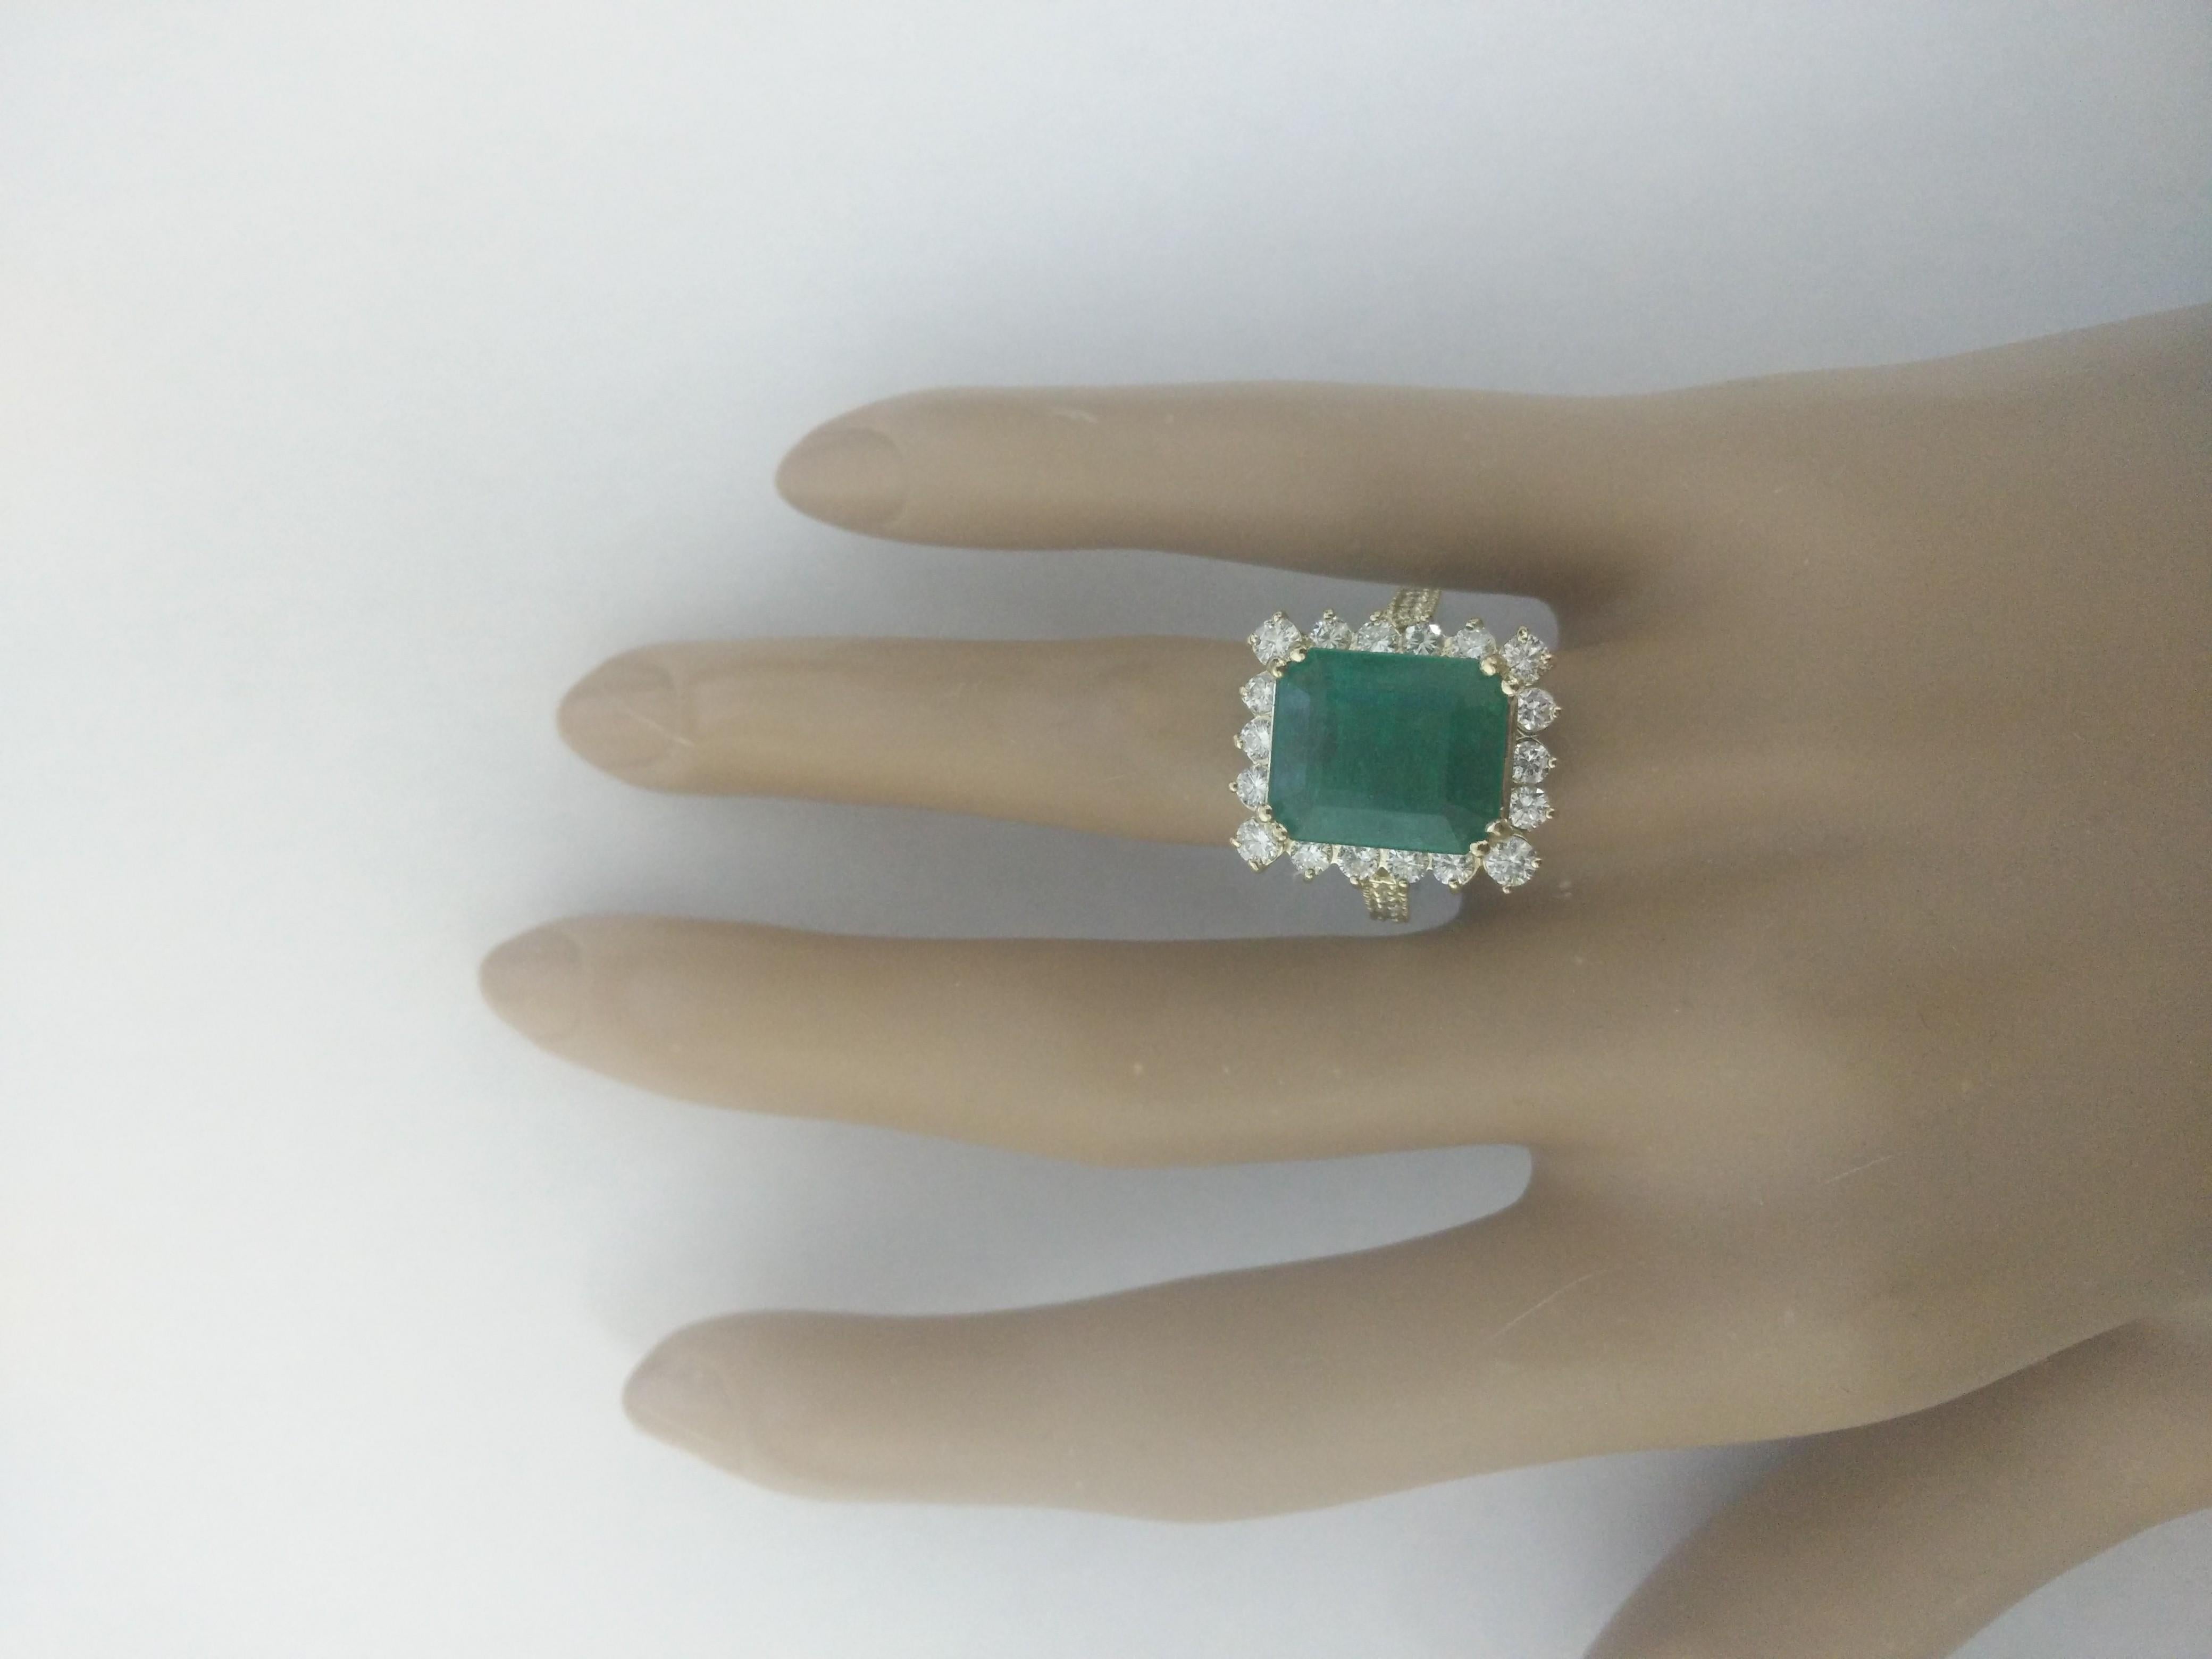 6.91 Carat Natural Emerald 14 Karat Solid Yellow Gold Diamond Ring
Stamped: 14K
Total Ring Weight: 9.2 Grams 
Emerald Weight: 5.51 Carat (13.00x11.00 Millimeters)  
Diamond Weight: 1.40 Carat (F-G Color, VS2-SI1 Clarity )
Quantity: 28
Face Measures: